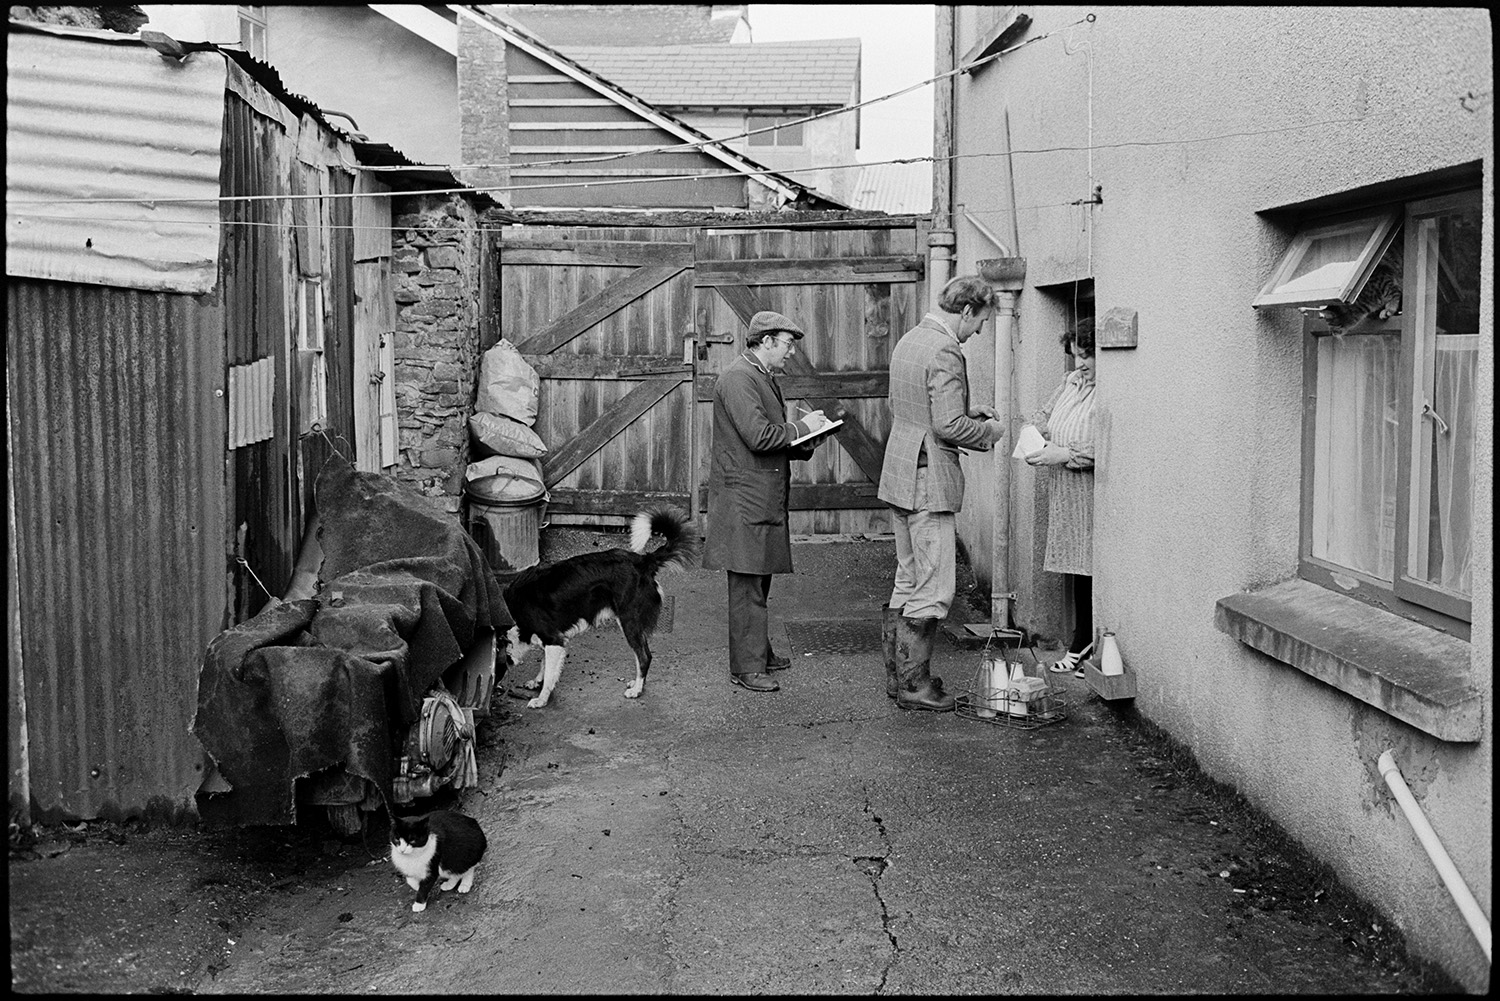 Milkman on last round chatting to customers, settling bills. Front of Post Office. 
[Ivor Bourne delivering milk to a woman at her house in Beaford on his last milk round. She is paying him for the milk. A man behind him is taking notes to take over the milk round. Also in the yard are a dog and a cat, and a corrugated  iron shed, opposite the house.]